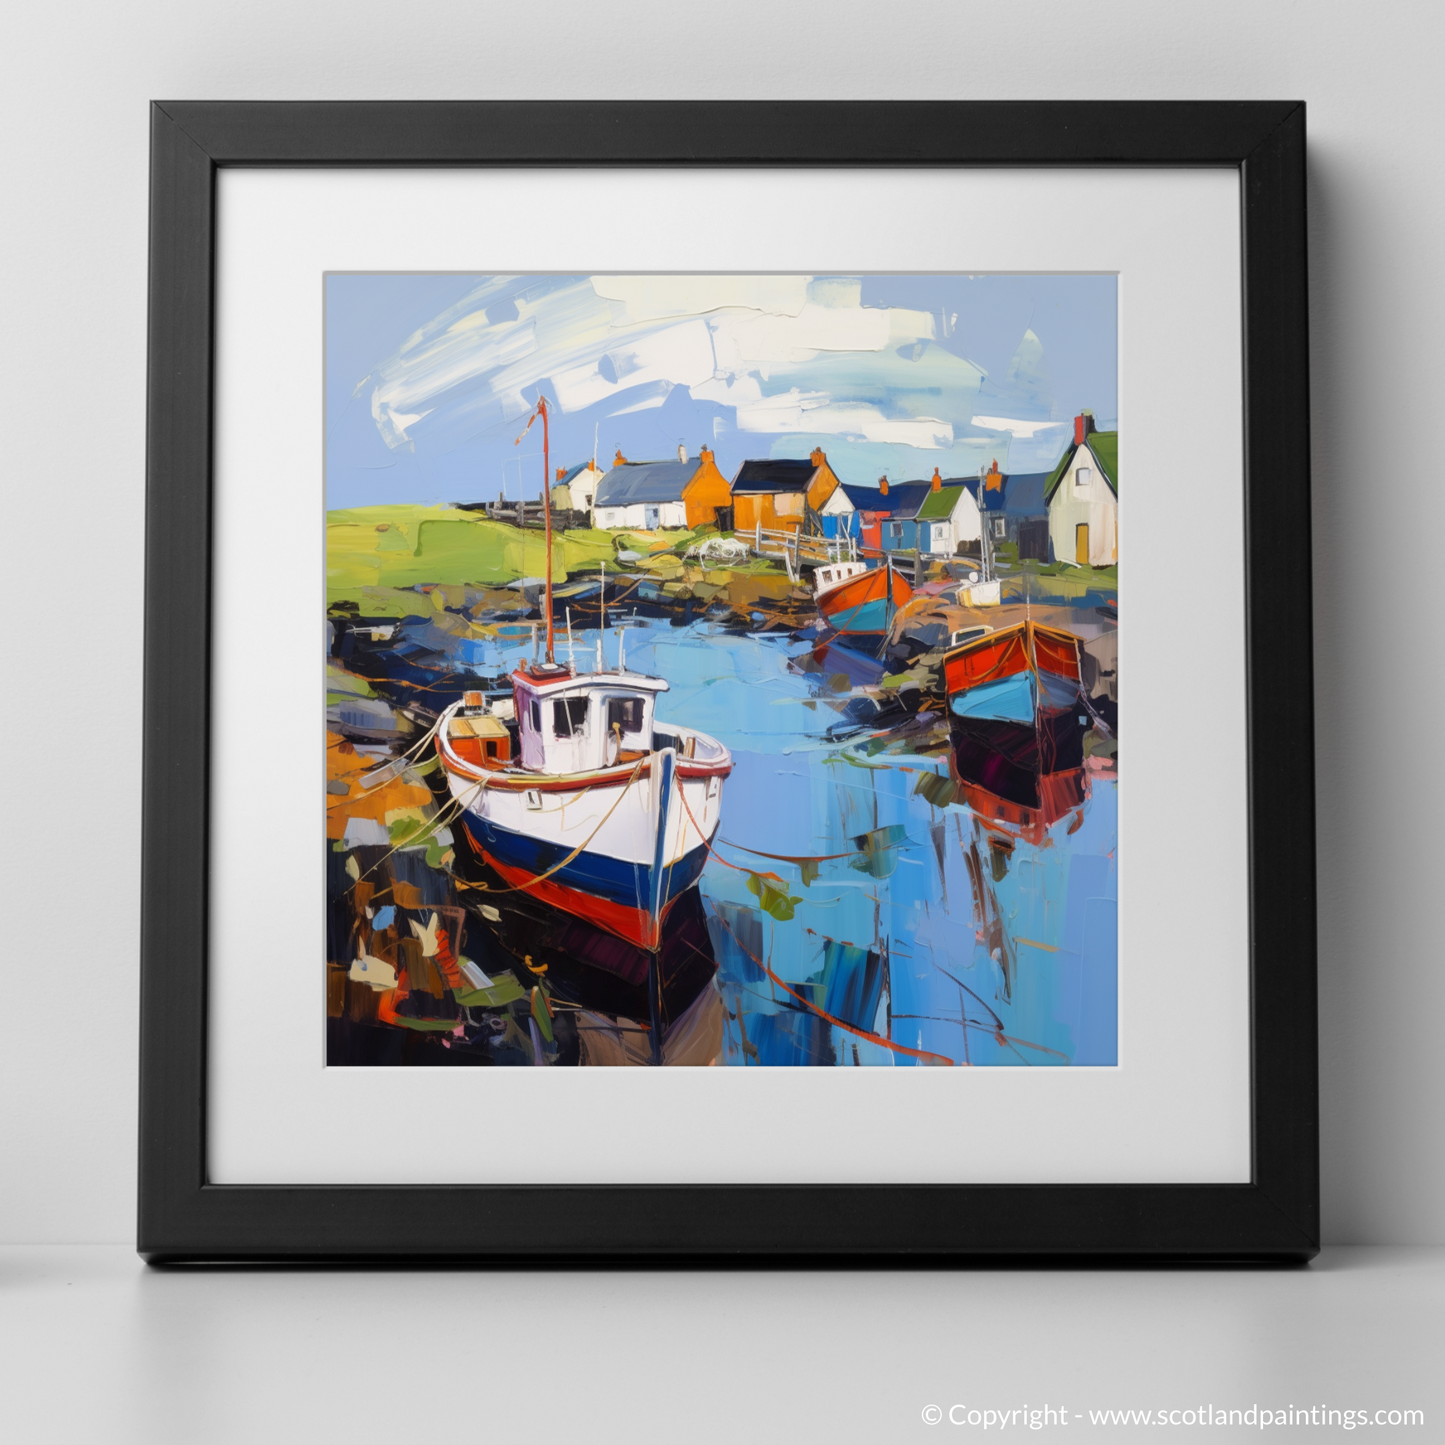 Art Print of Lybster Harbour, Caithness with a black frame